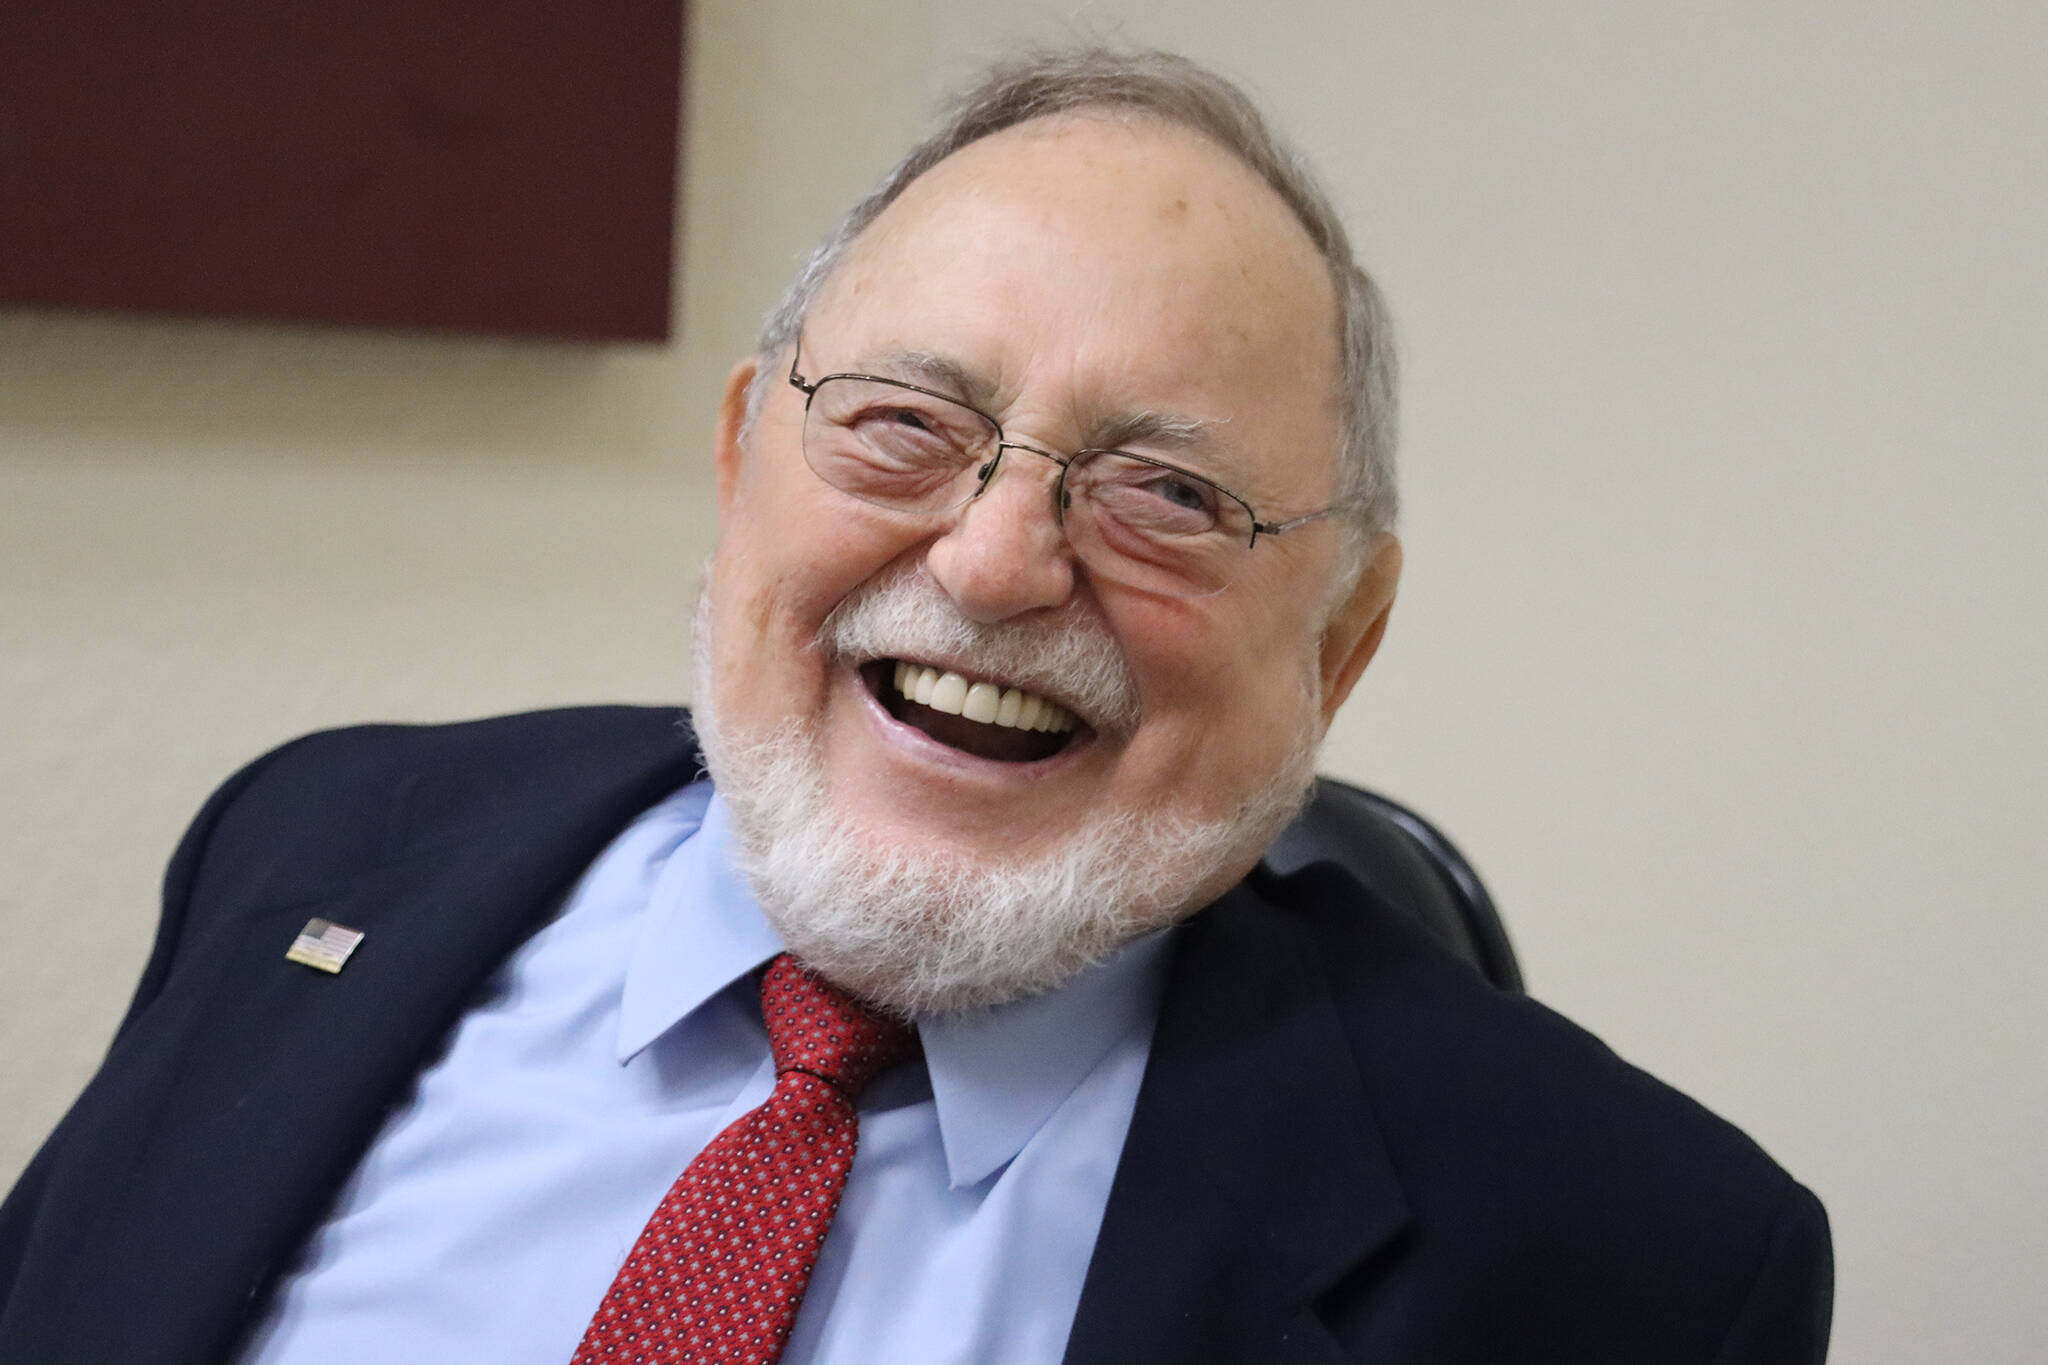 Rep. Don Young smiles during a sit-down in the Juneau Empire's offices last June. Young died on Friday, according to the longtime U.S. representative's office. (Ben Hohenstatt / Juneau Empire File)